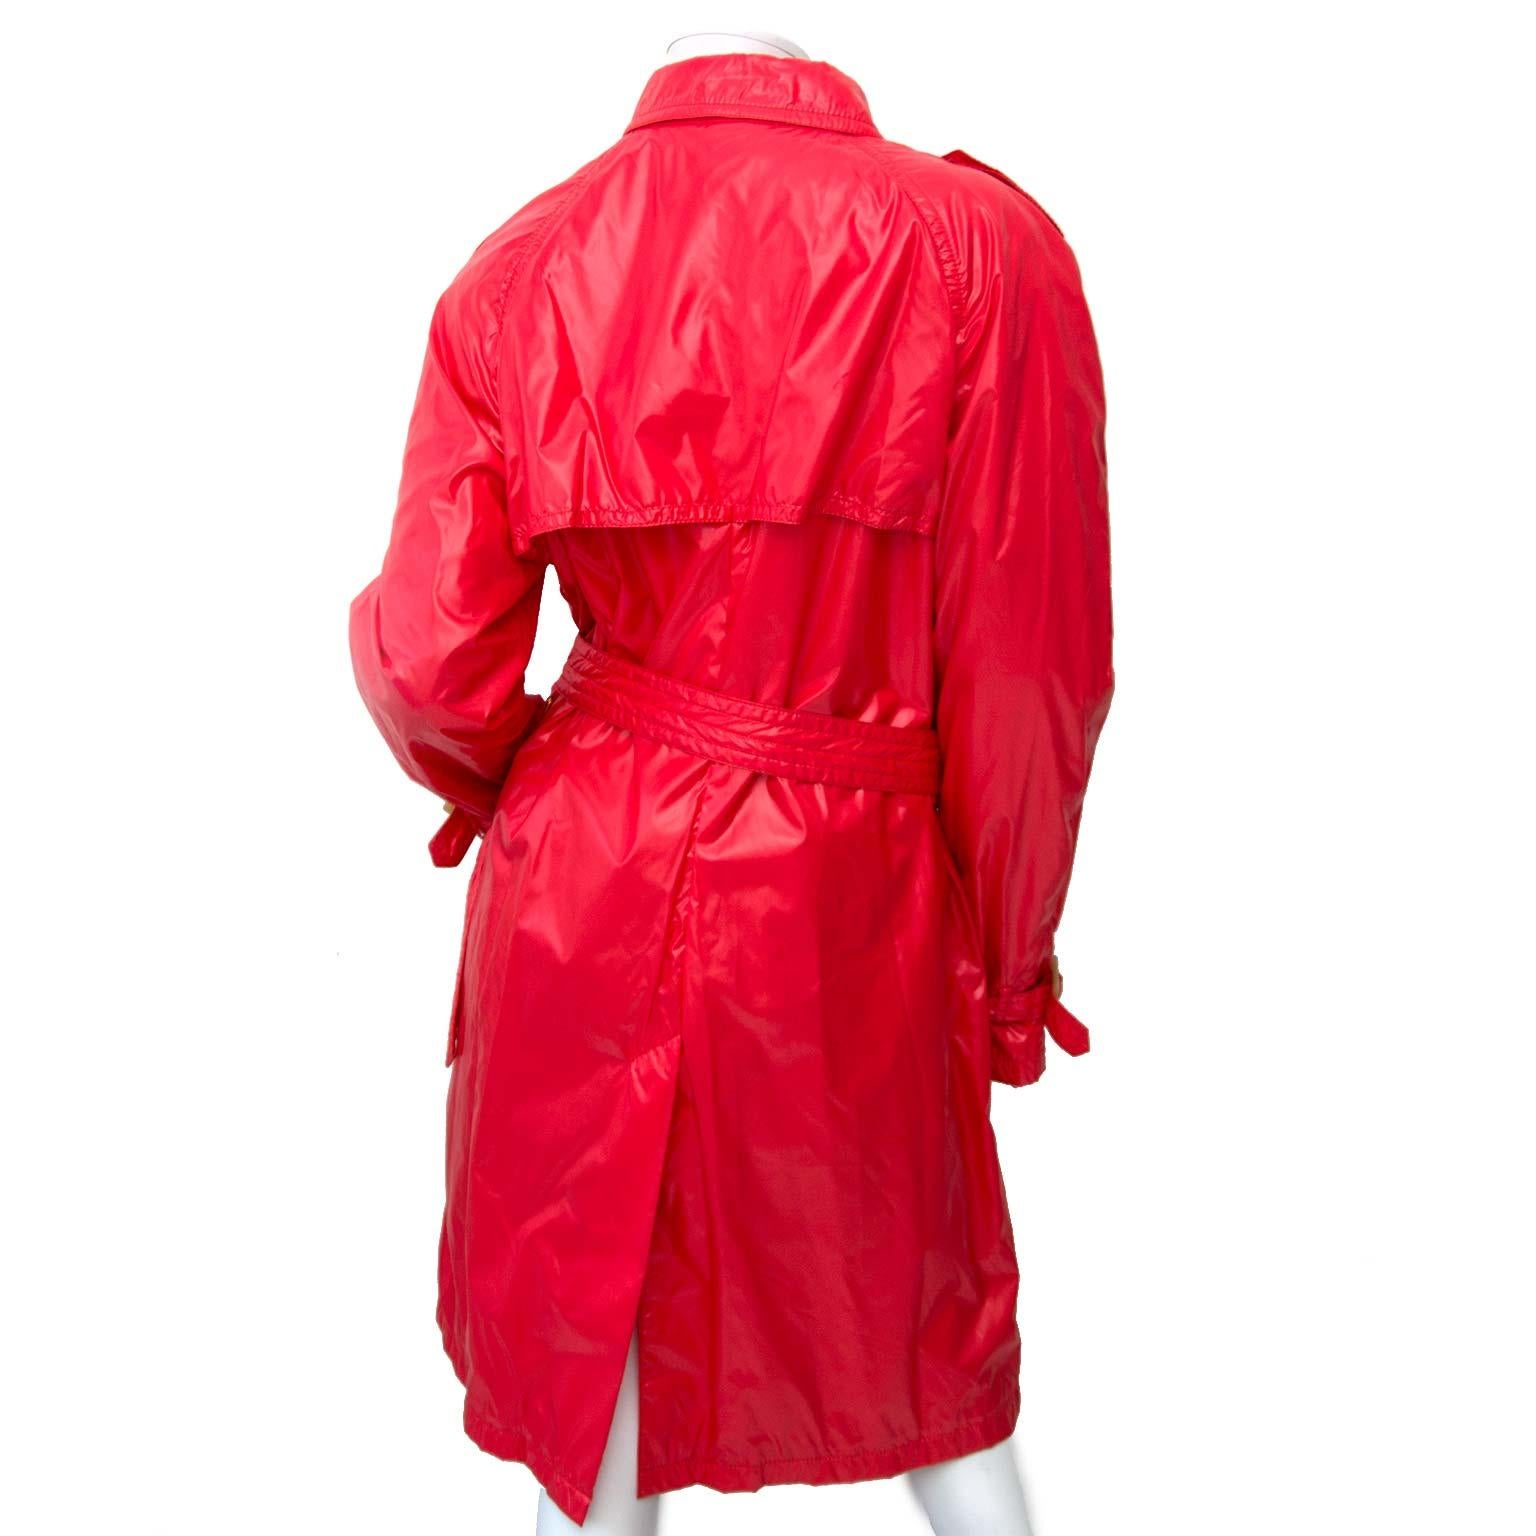 Very good preloved condition

Moncler Red Raincoat

Get into the rain in style with this red Moncler raincoat! 
Who says that rainy days need to be boring? With this red raincoat, you'll shine all day long.
This soft Moncler raincoat is made of 100%